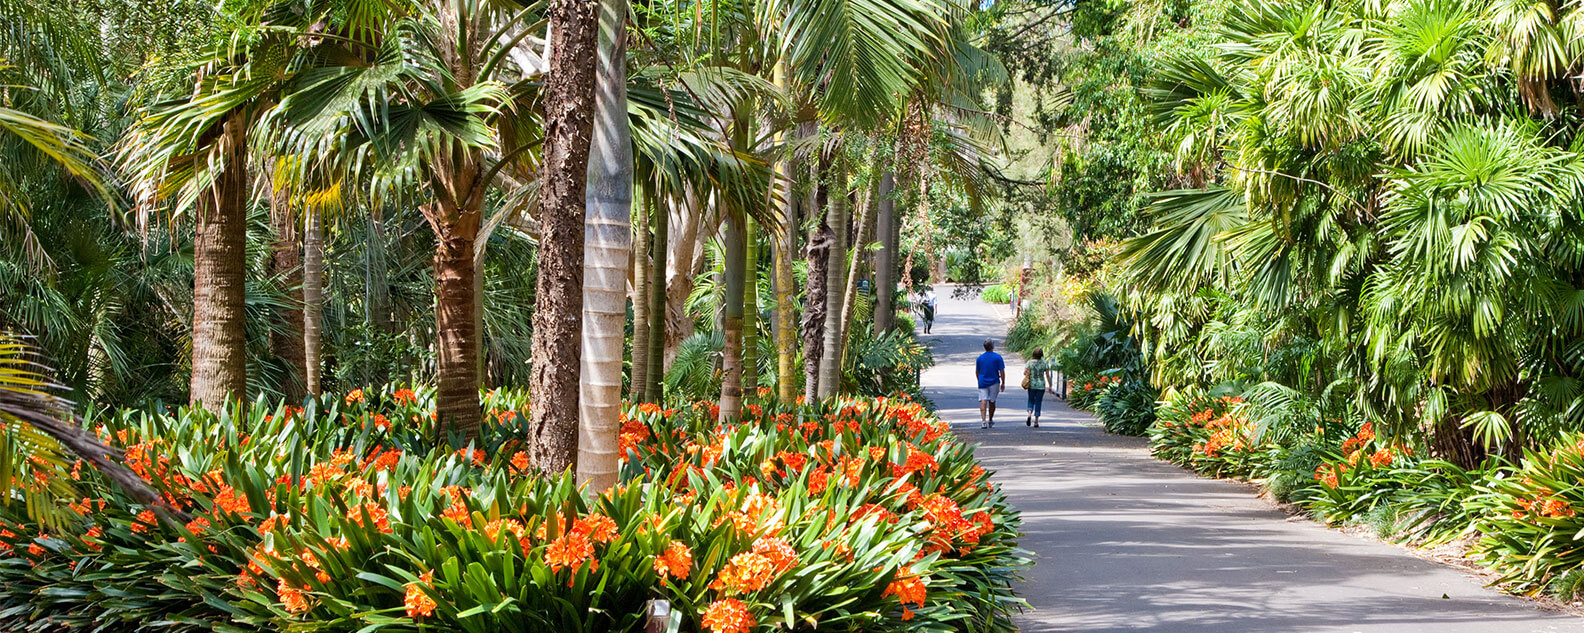 Pathway leads through the Palm Grove